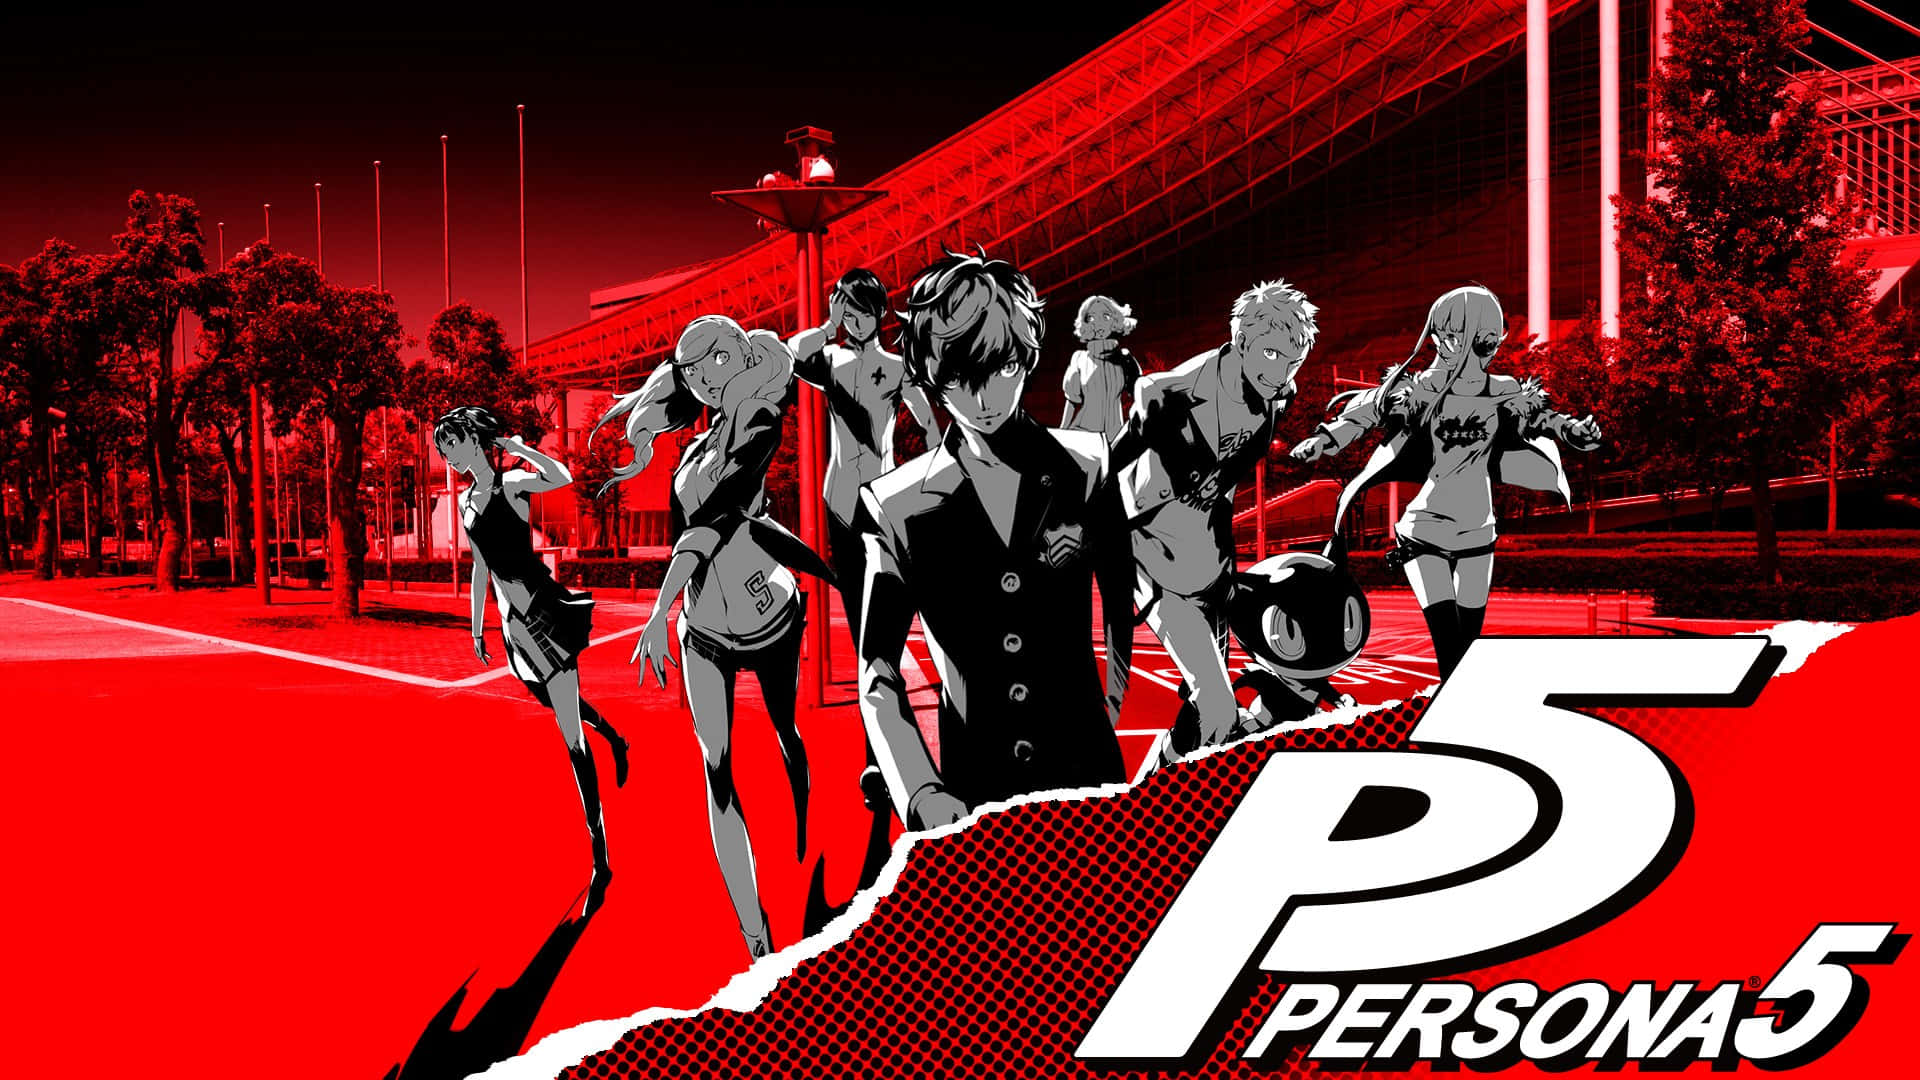 Official logo of the critically-acclaimed video game "Persona 5" Wallpaper